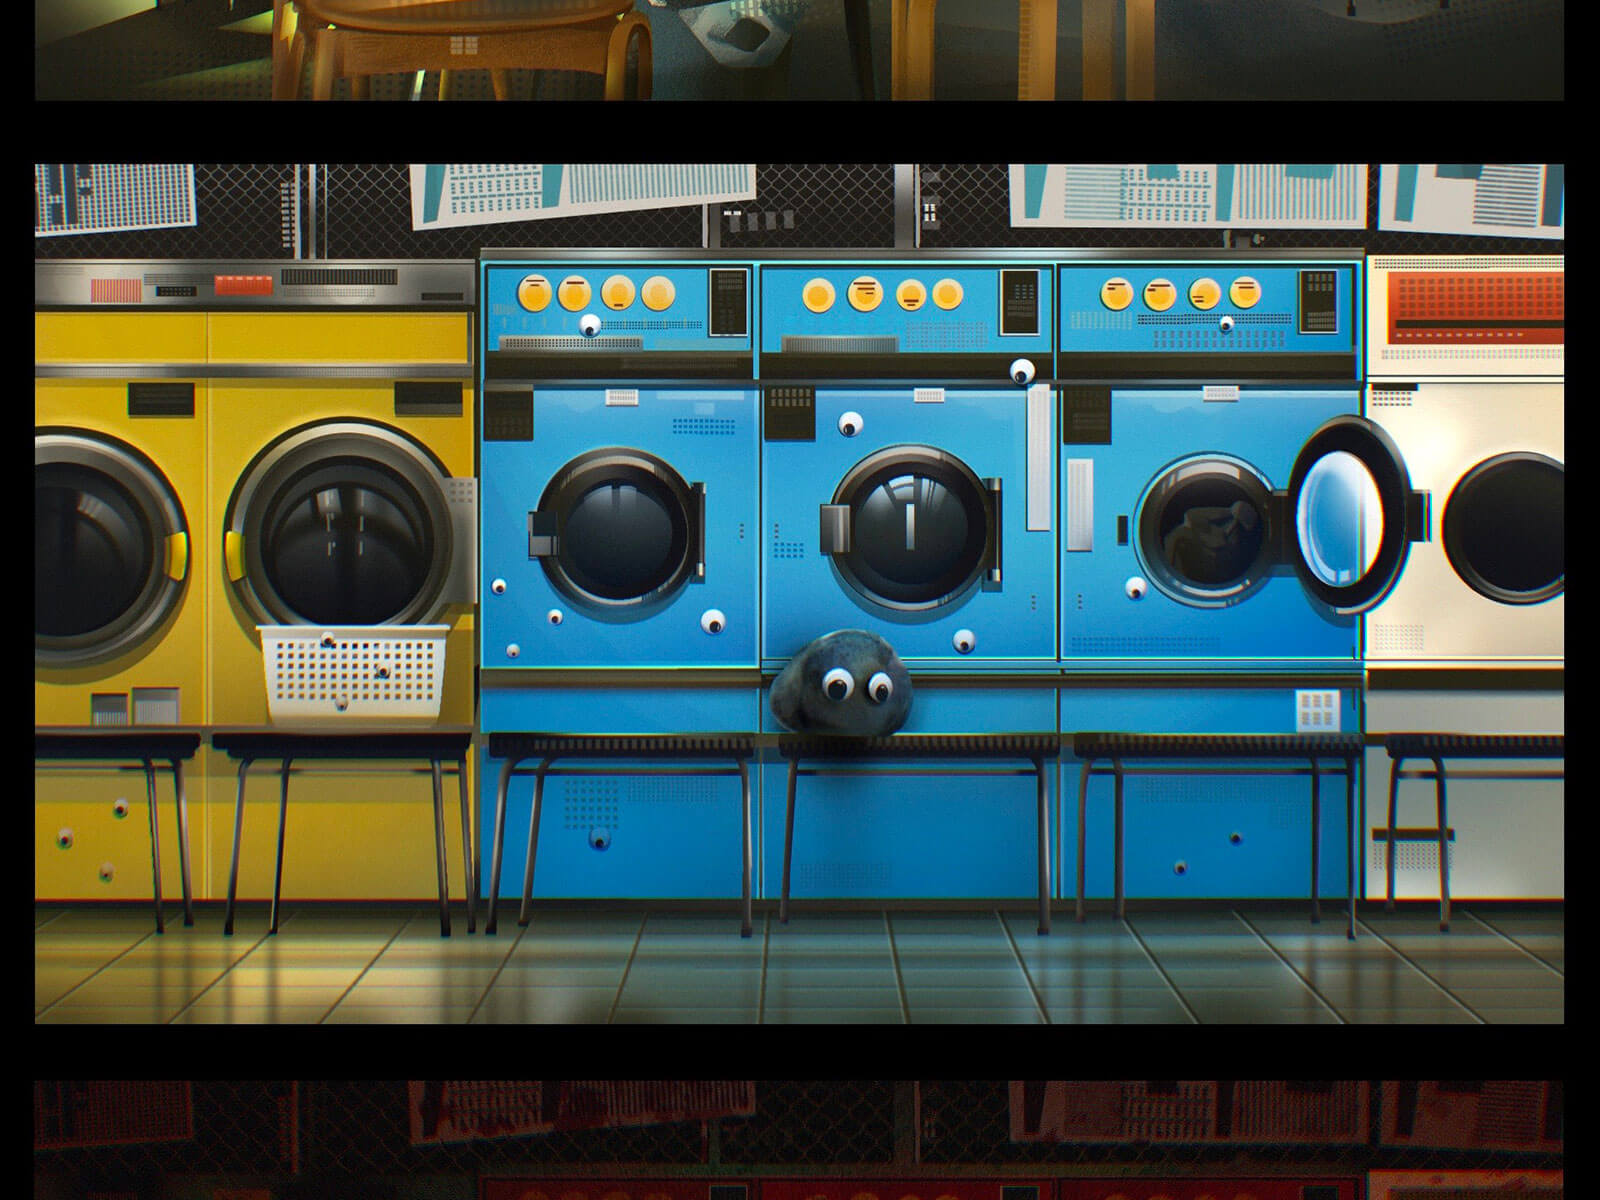 Three different shots of multicolored washing machines that also feature a cat and a harrowing scene with a woman hanging out a red washing machine